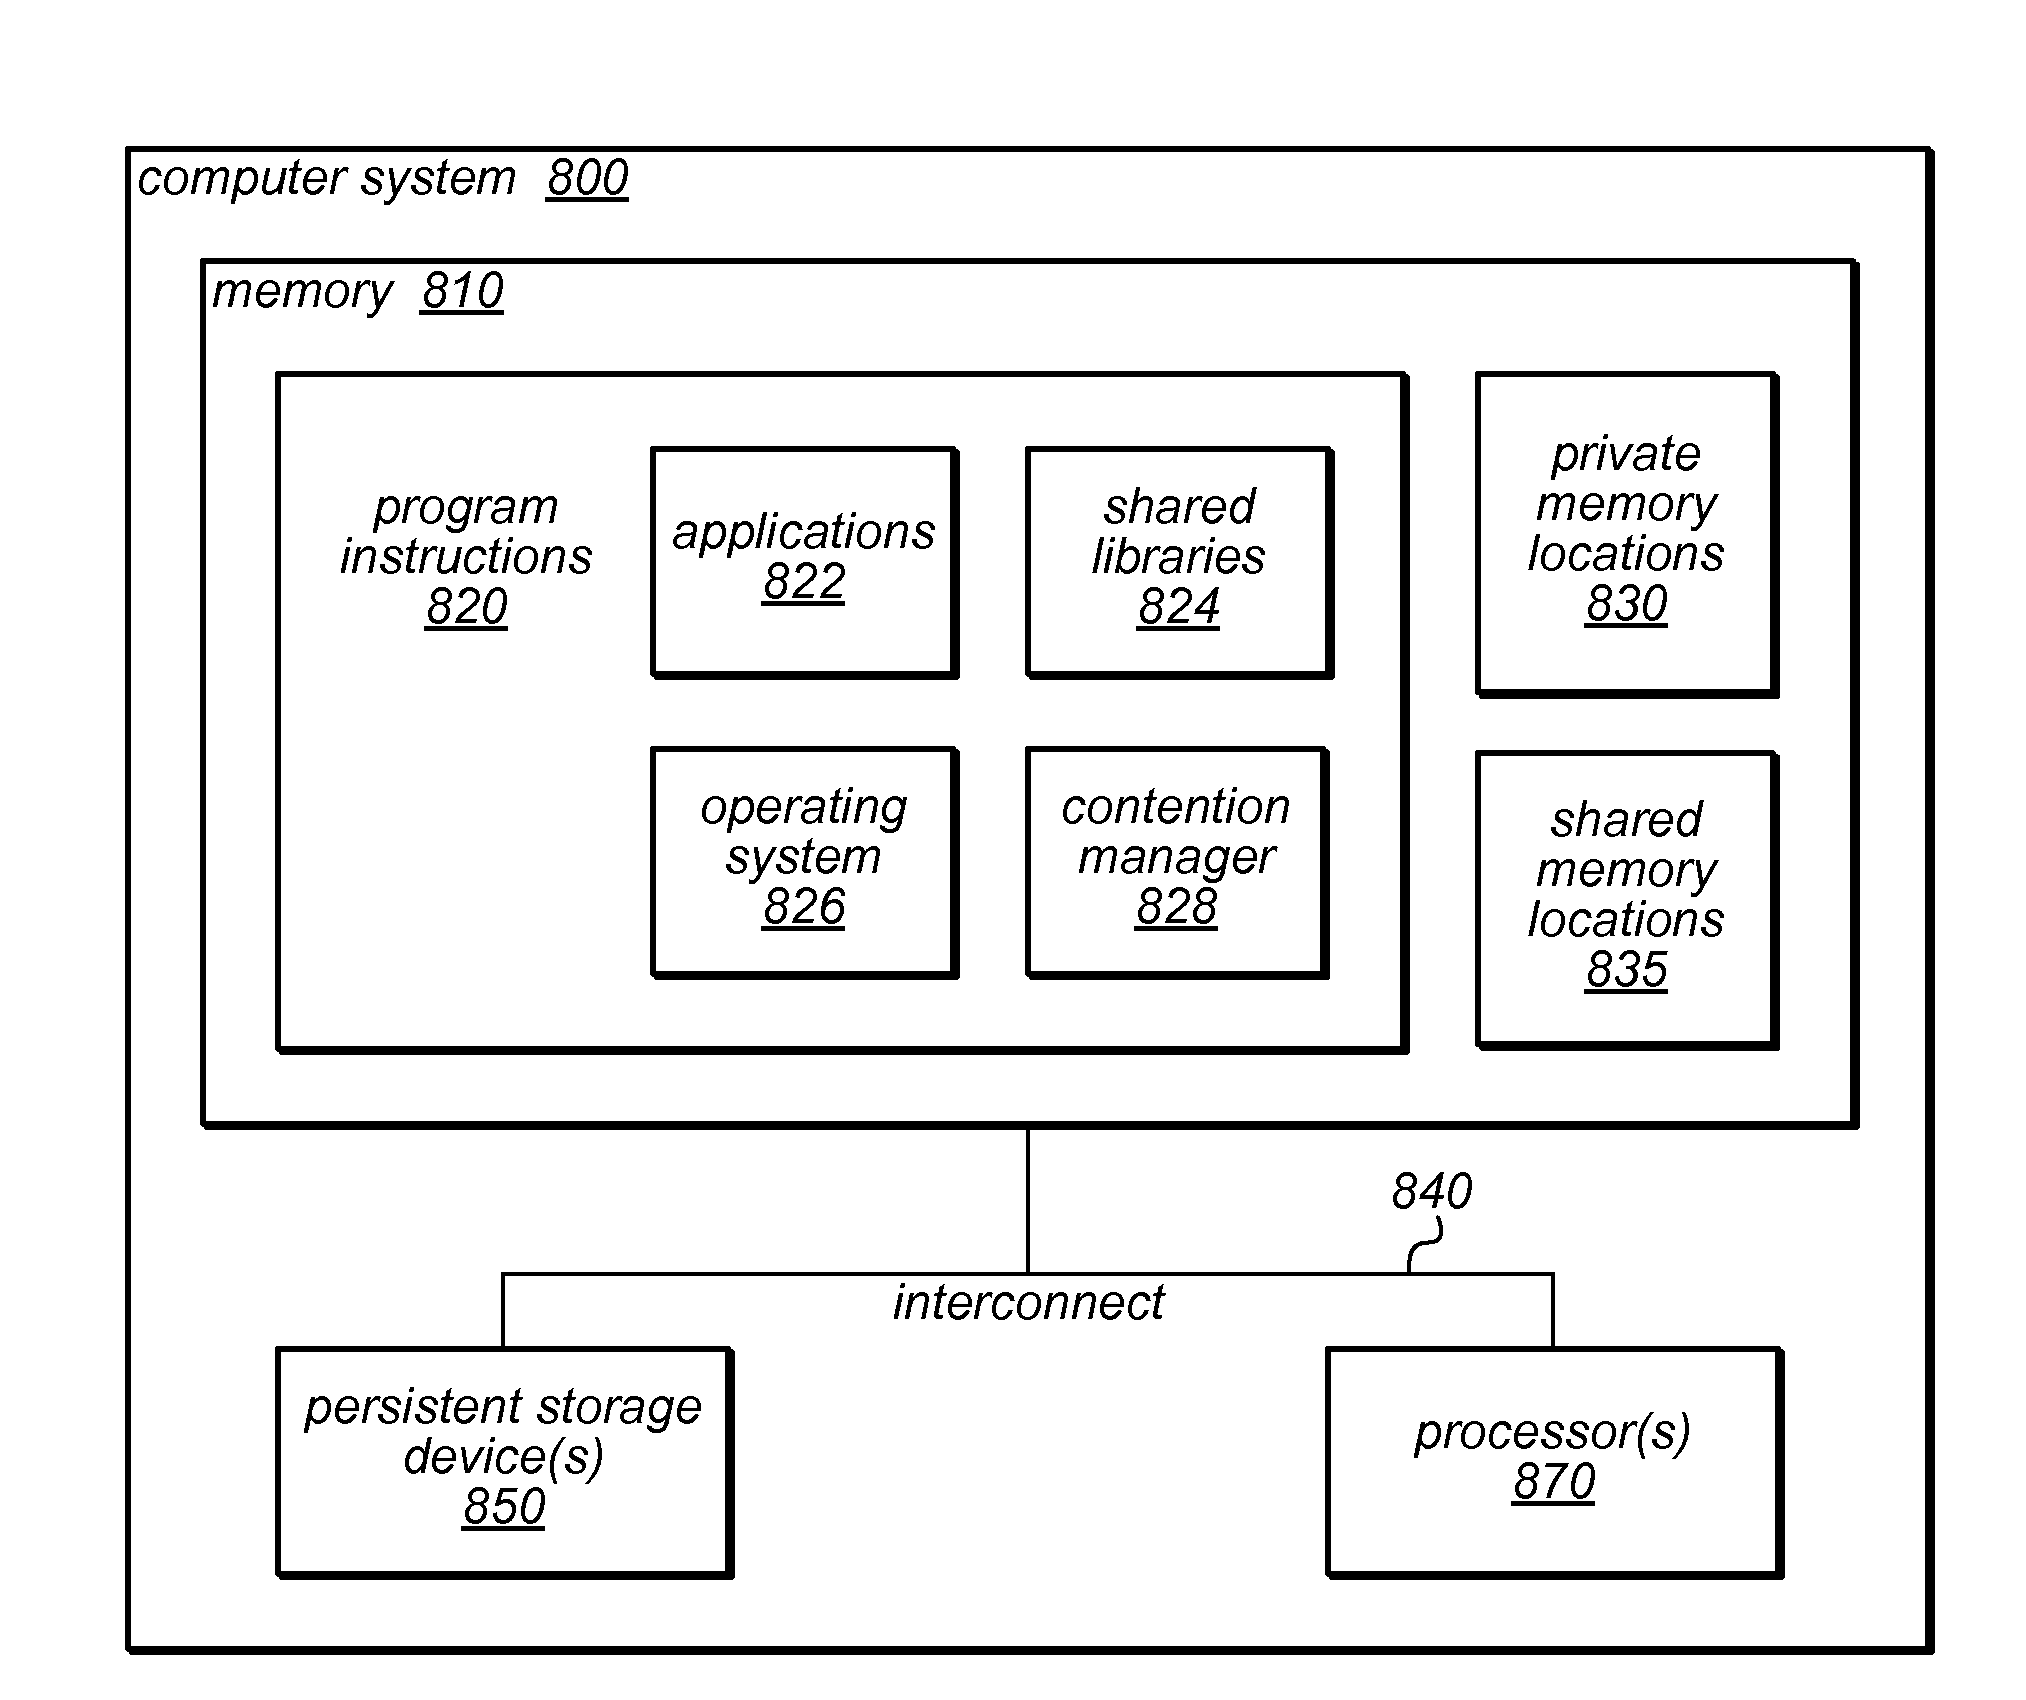 System and Method for Performing Dynamic Mixed Mode Read Validation  In a Software Transactional Memory